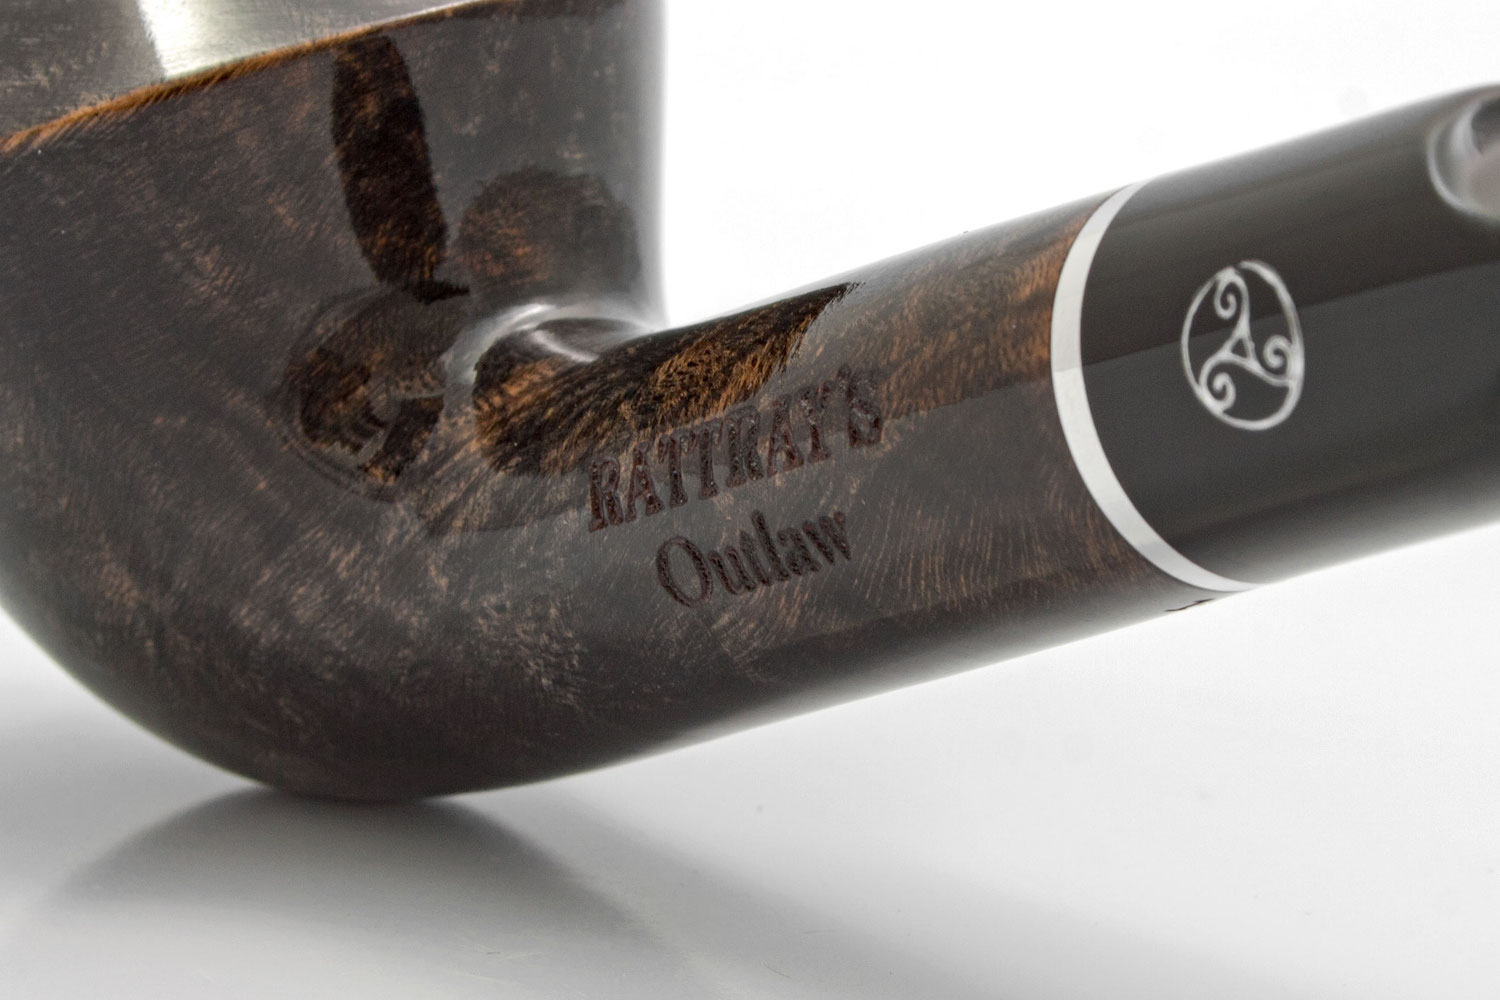 Rattray's Outlaw Grey 140